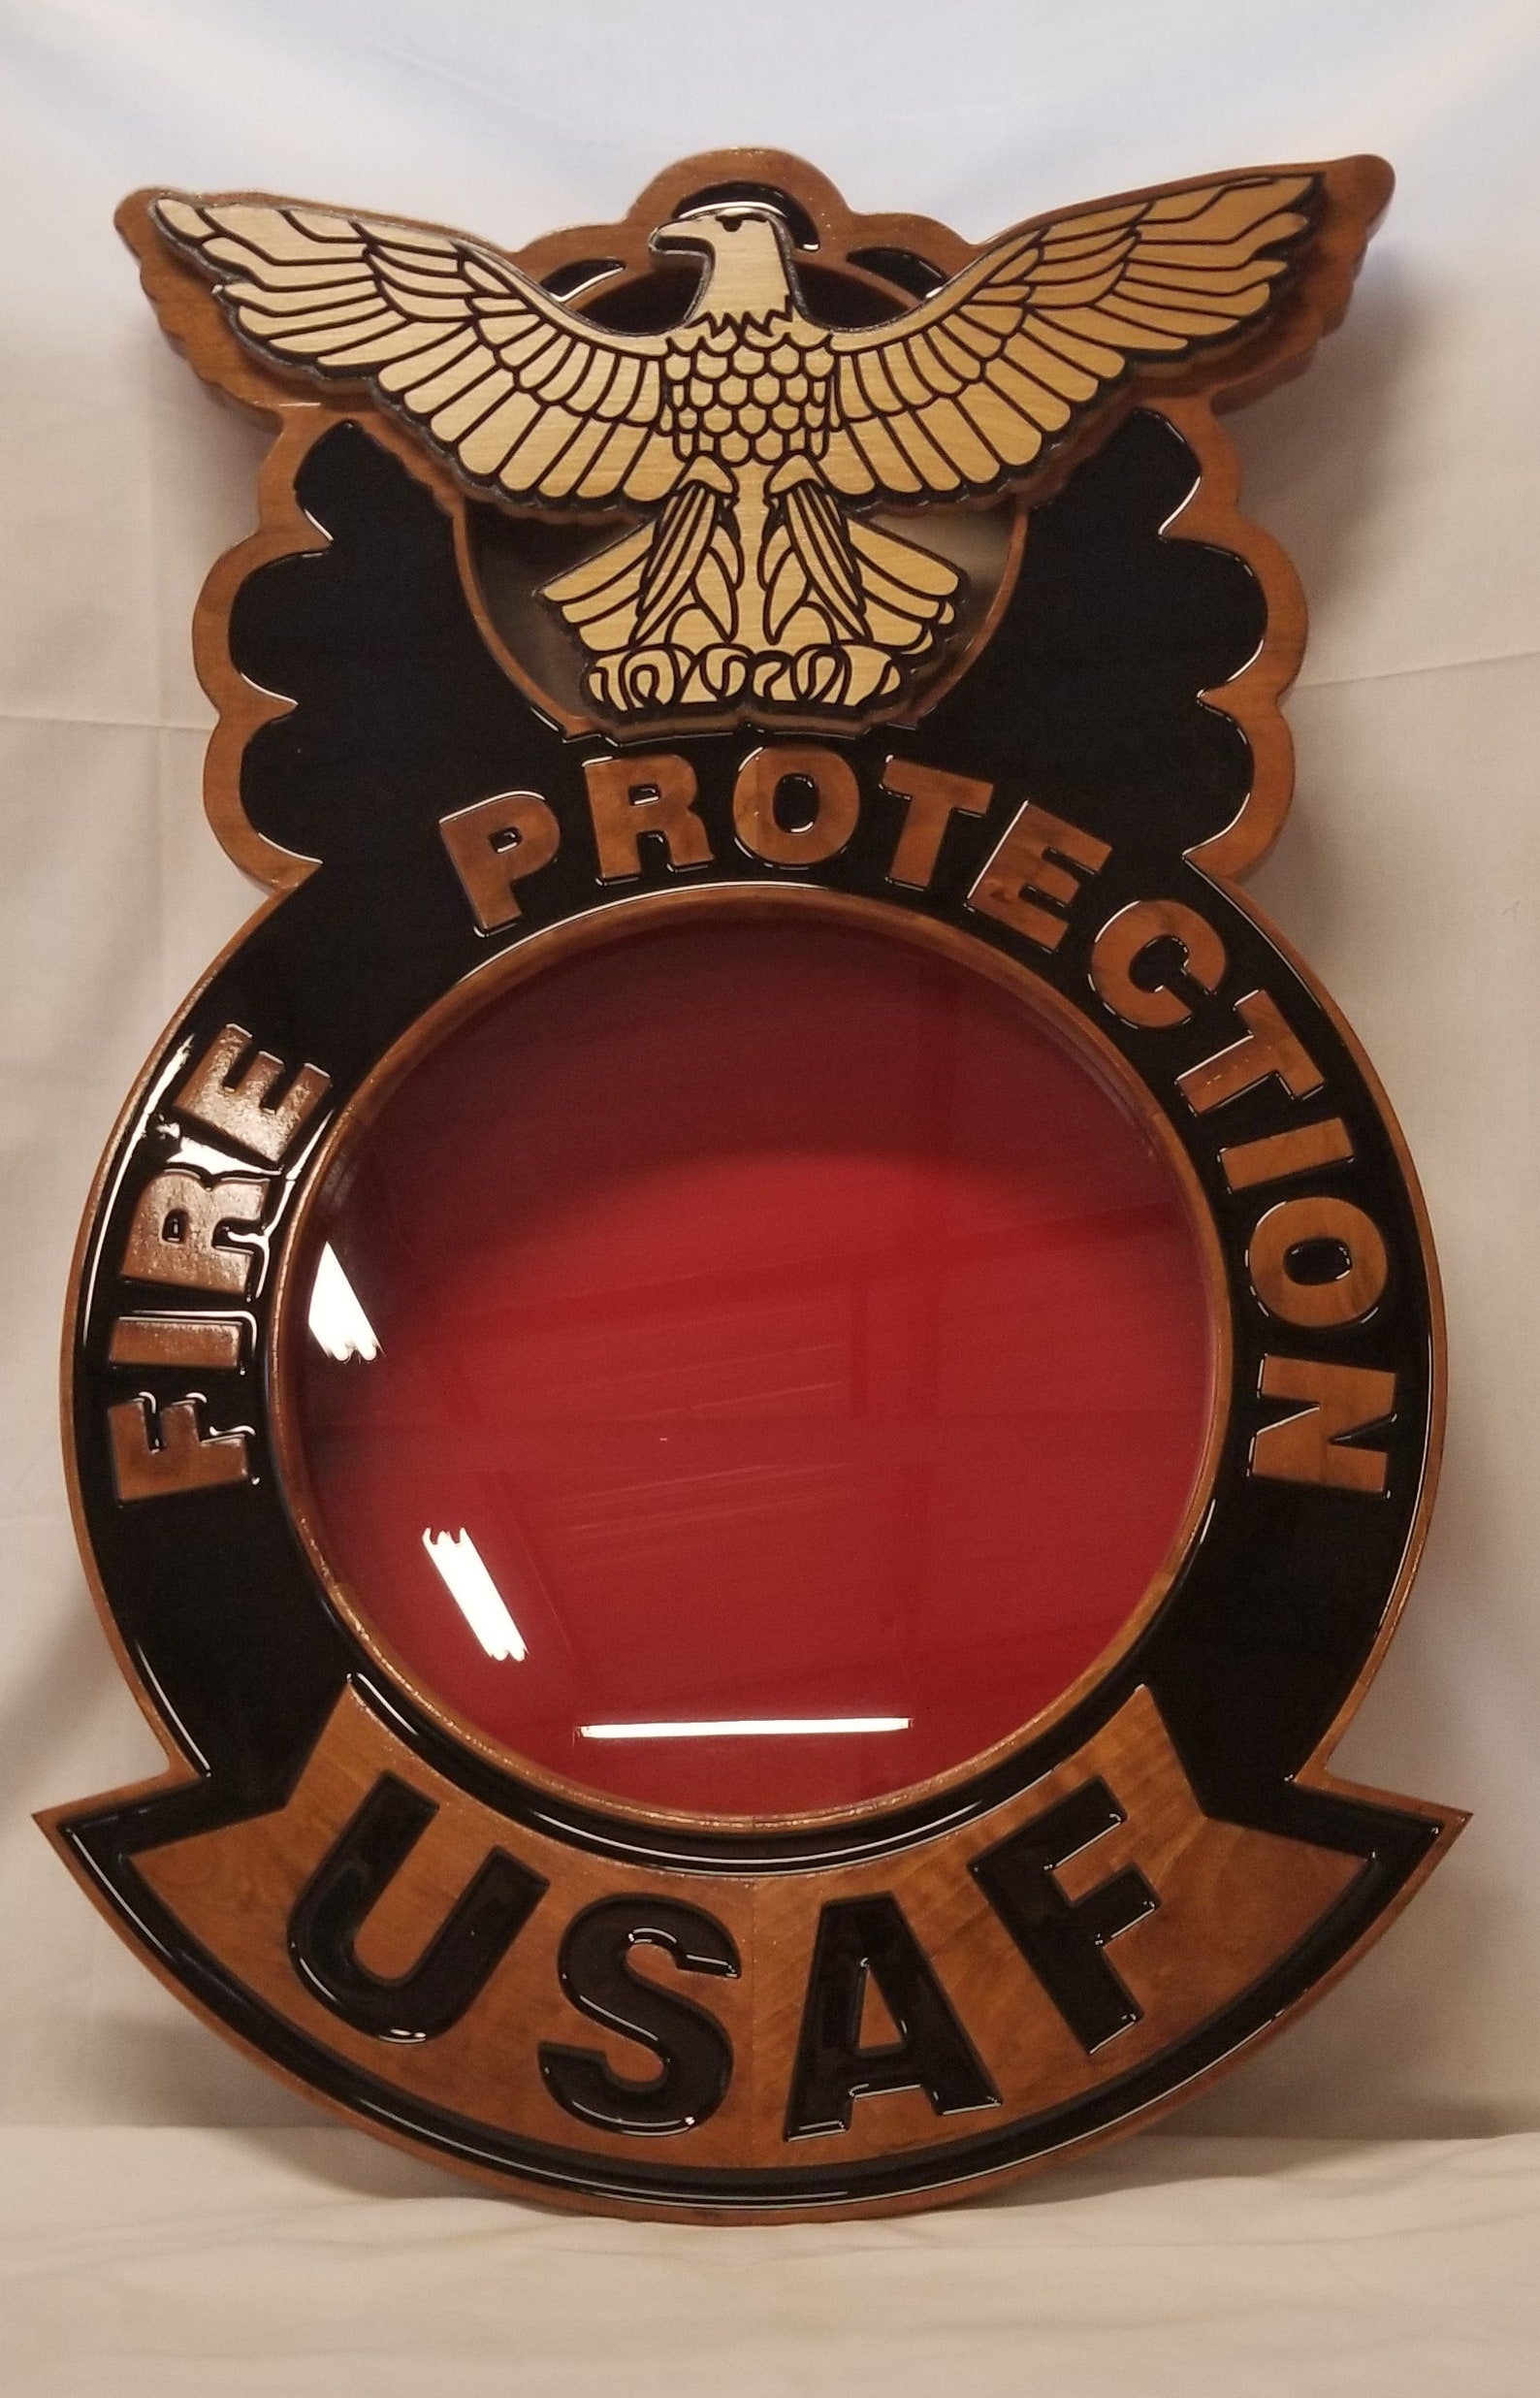 Air Force Fire Protection Shadowbox